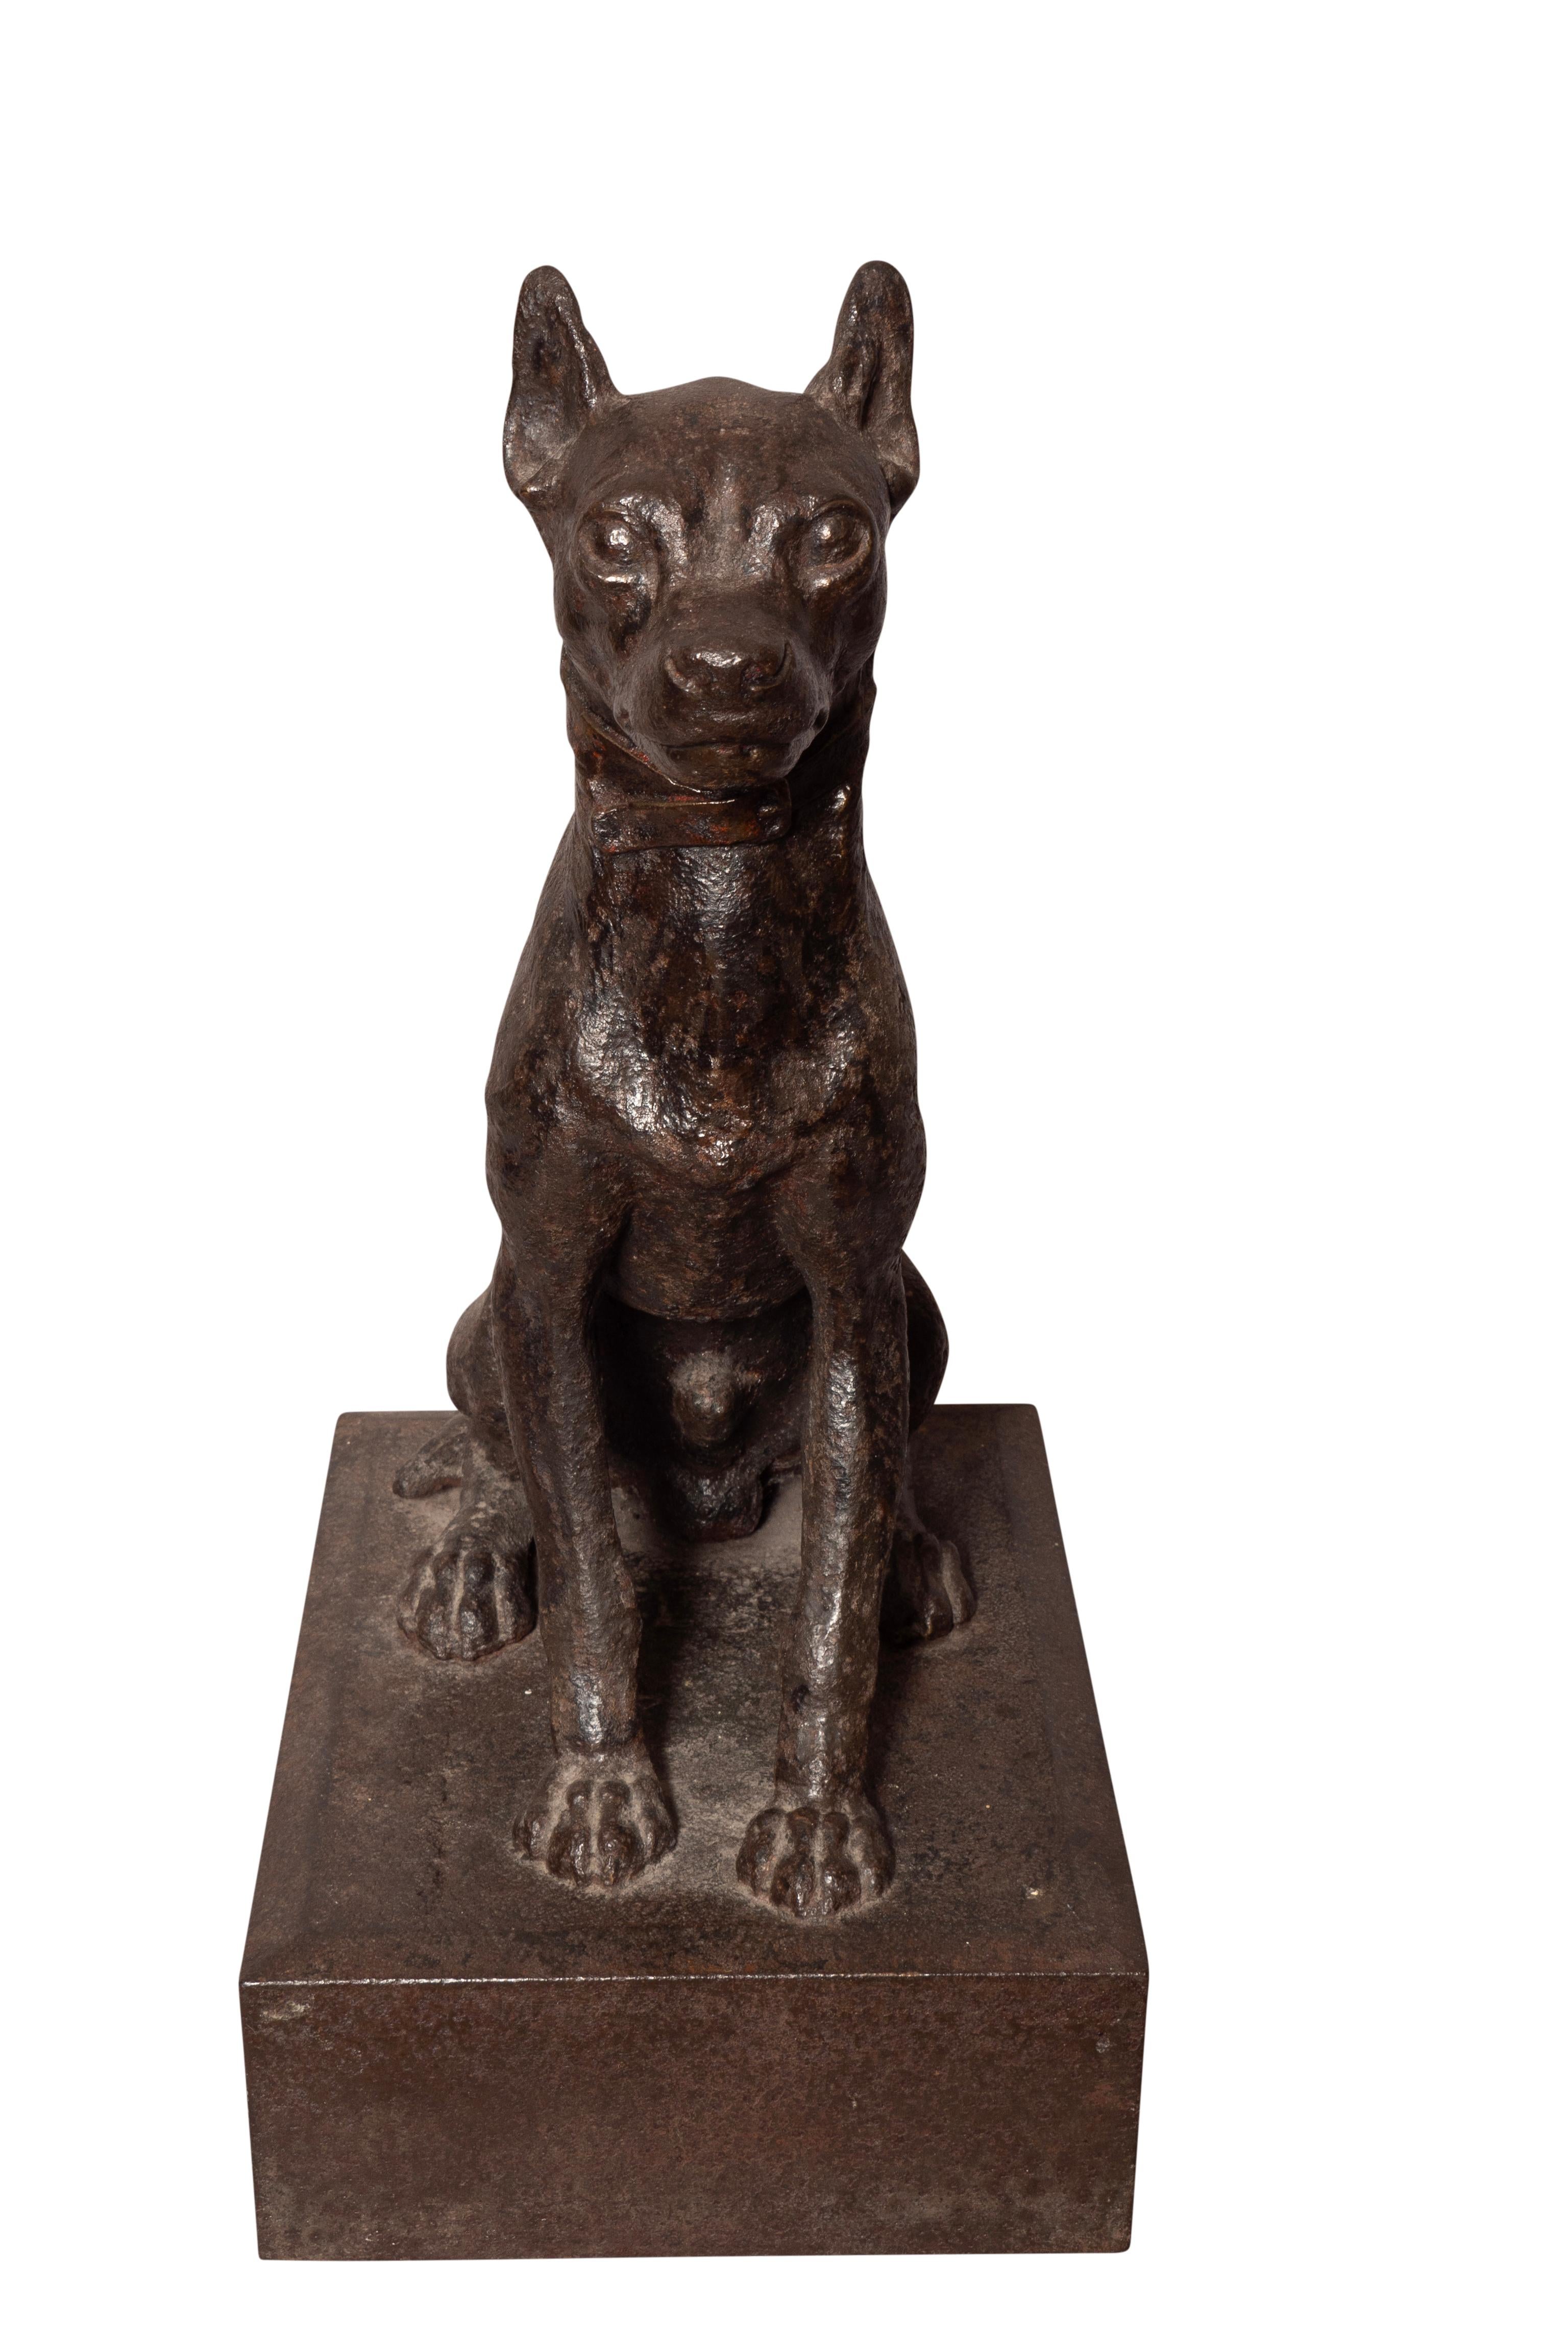 Large heavy seated male dog. Well cast with nice details.Seated on a plinth base.